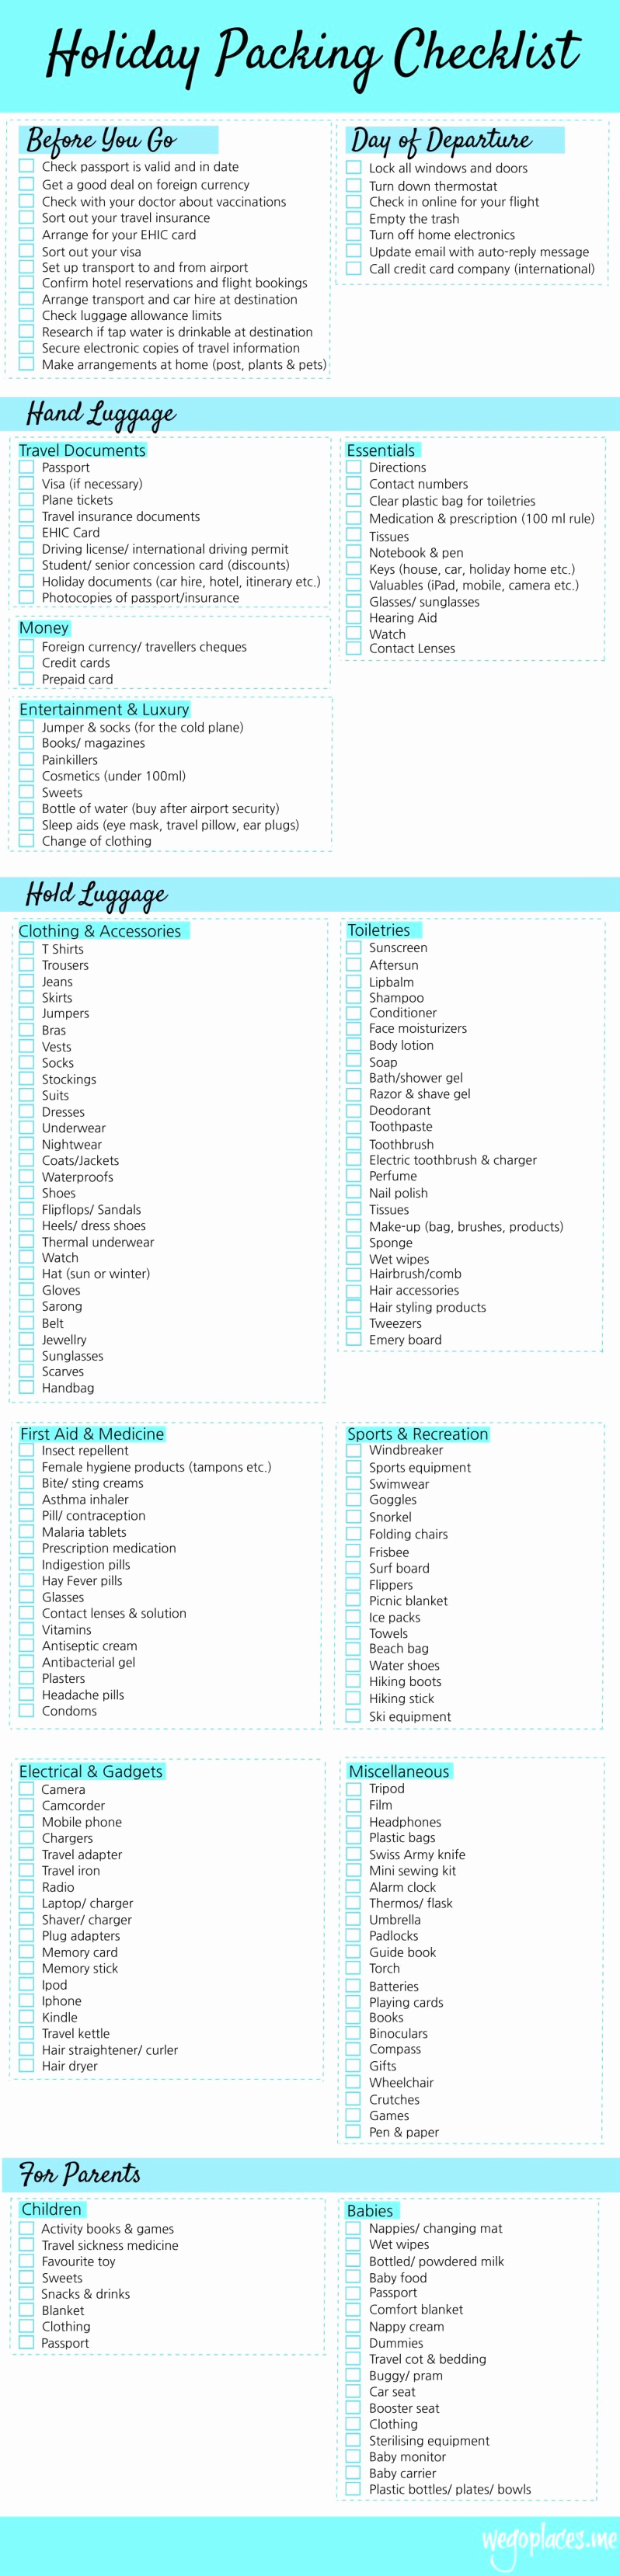 Travel Packing Checklist Pdf Luxury Holiday Packing Checklist